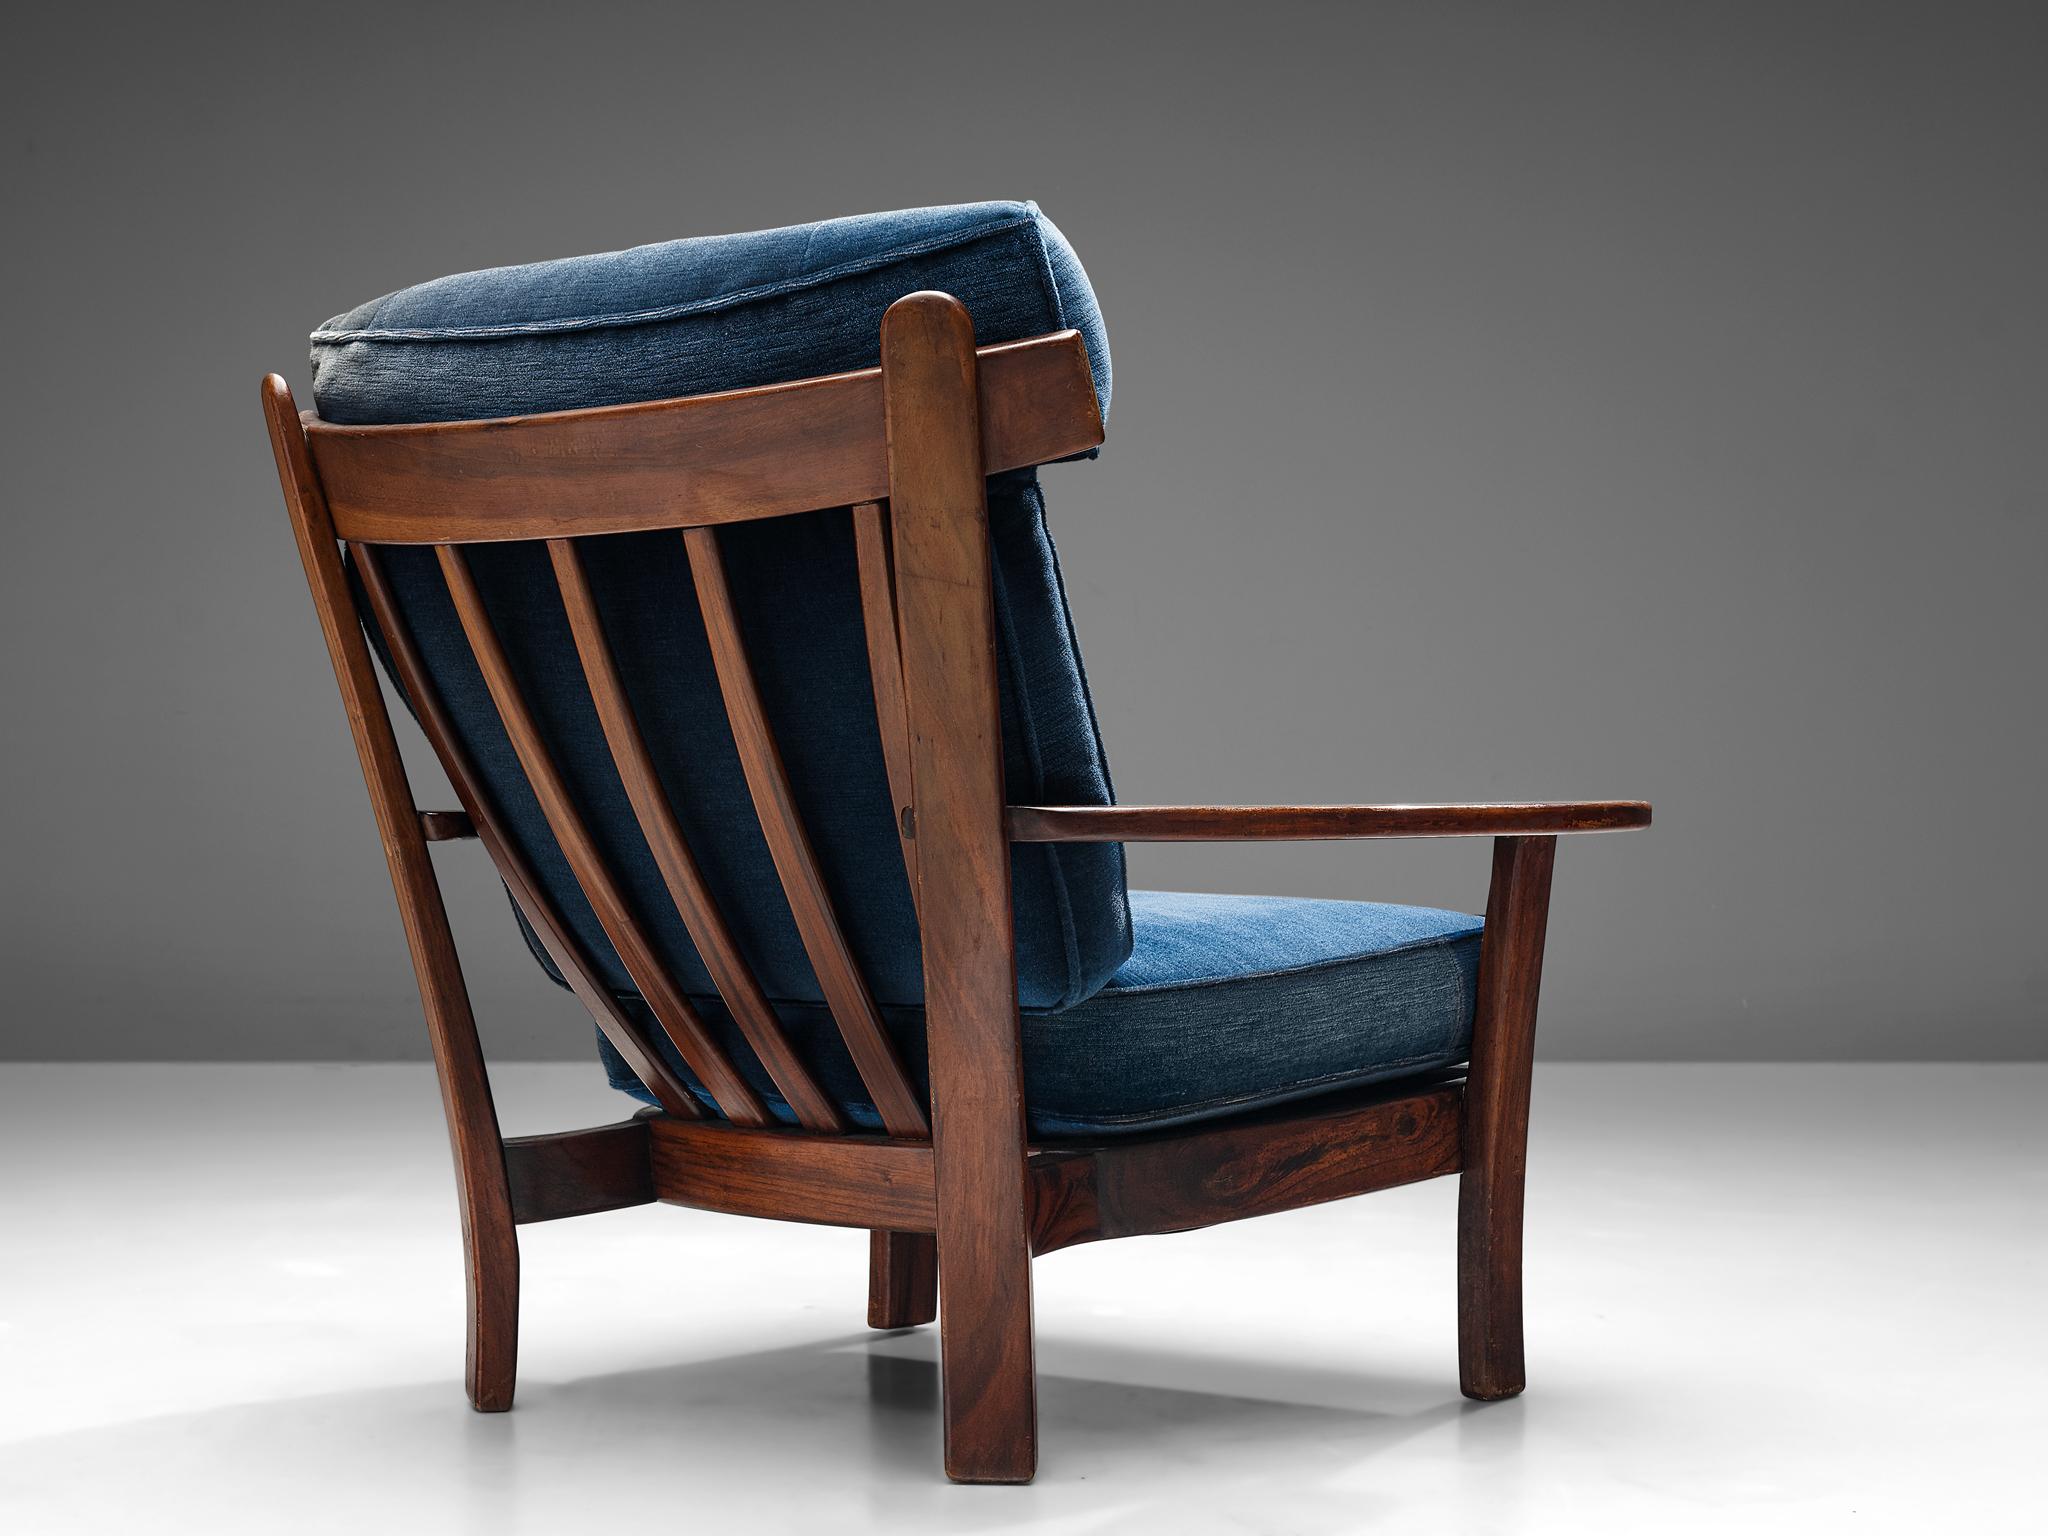 Lounge chair, solid hardwood and velvet blue upholstery, Europe, 1960s.

This stately and well-executed lounge chair shows beautiful craftsmanship. The chair is constructed in a refined manner, showing clear lines and harmonious combination of